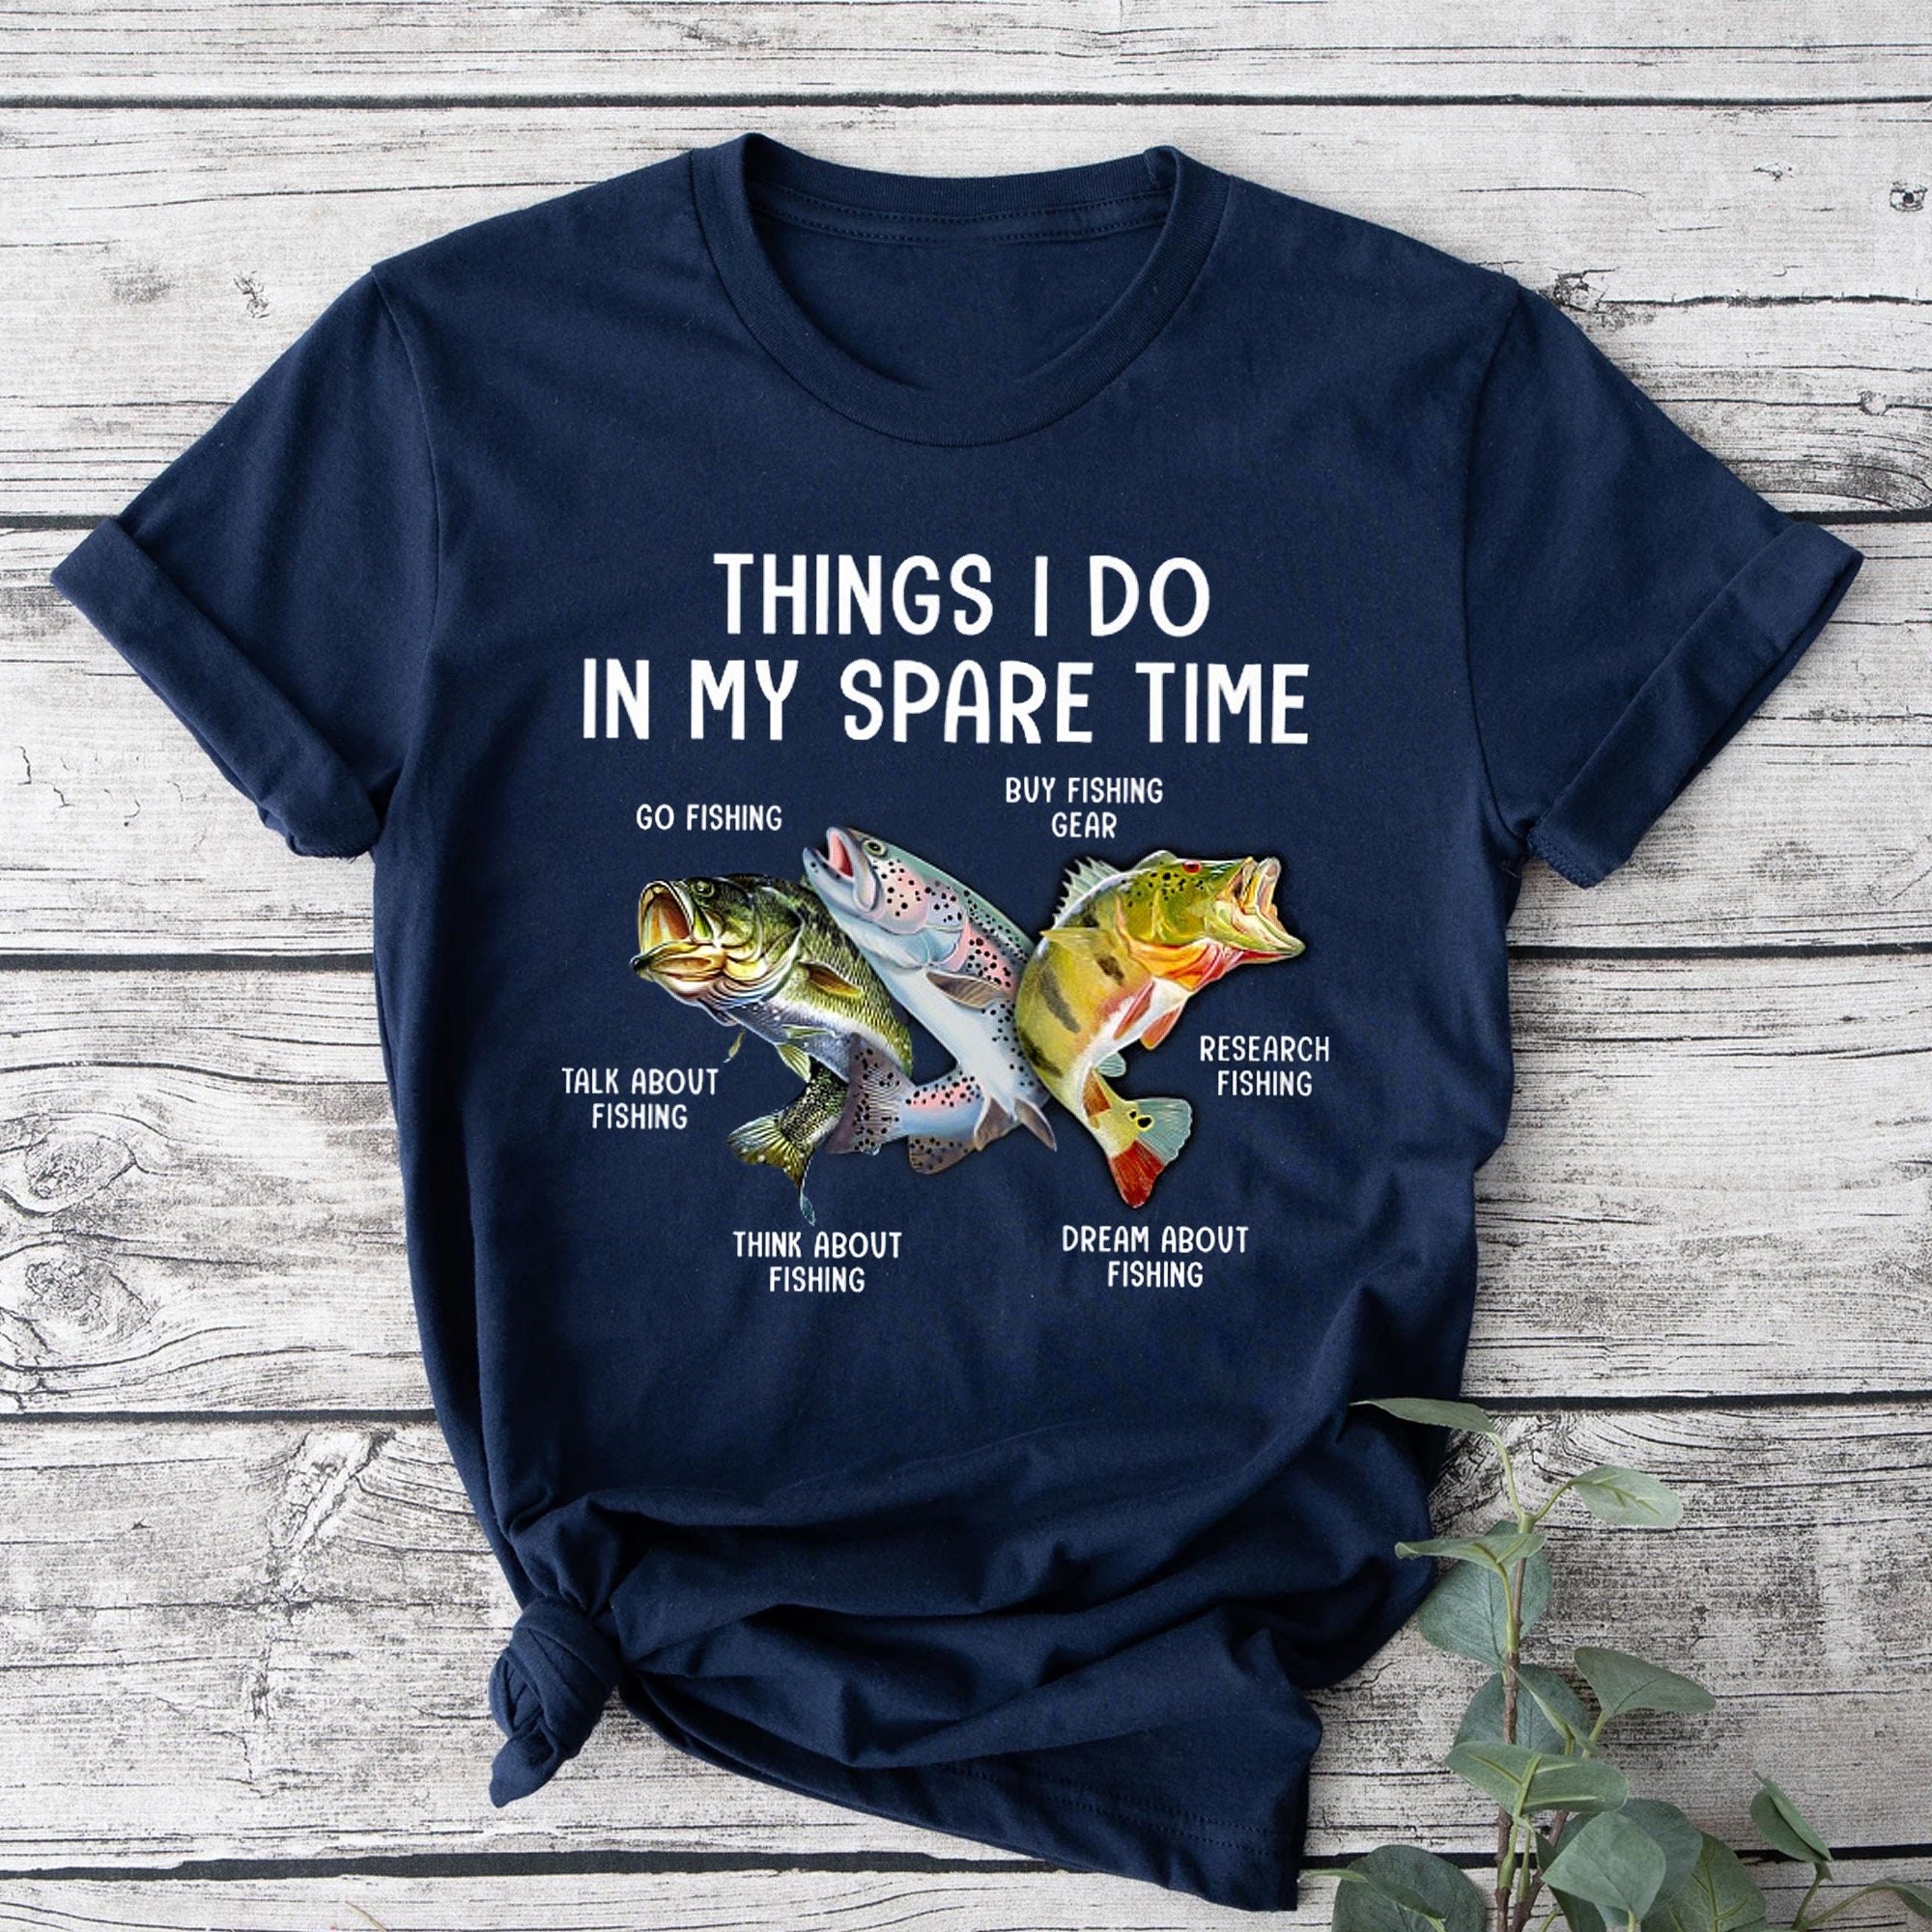 Fishing Things I Do in My Spare Time T-shirt, Fishing Gifts, Fisherman  T-shirt, Fishermen Gifts, Fishing Lover T-shirt, Fishing Tee 